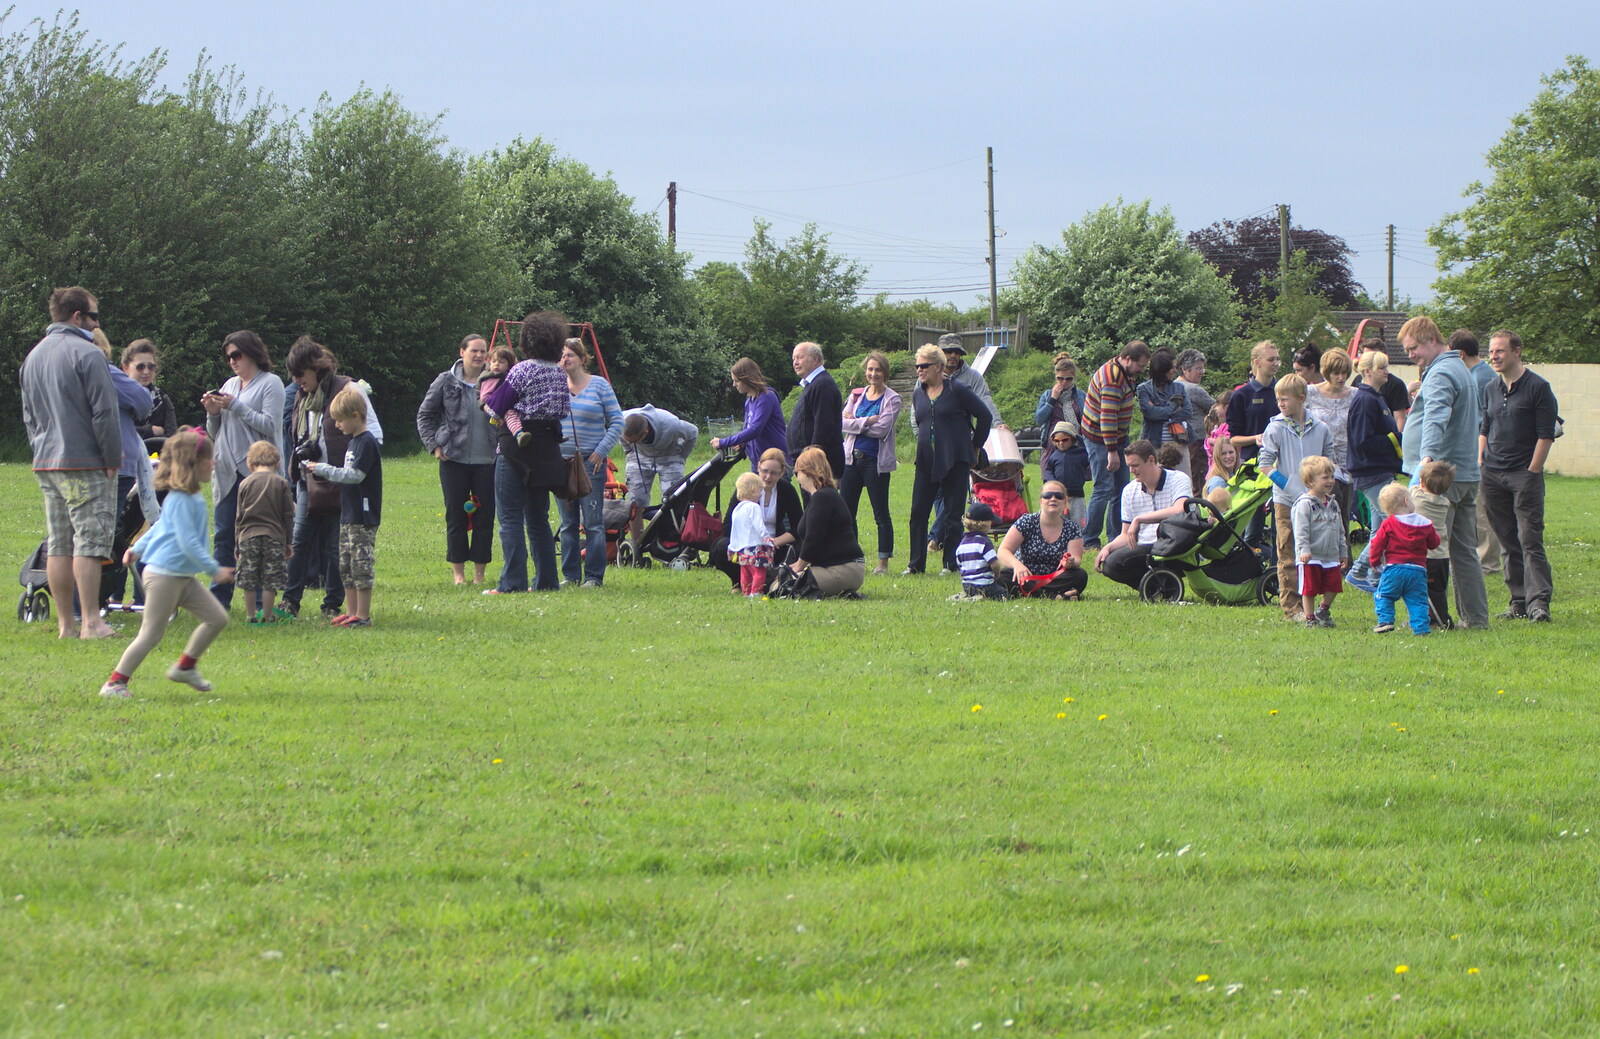 Fred's Sports Day and Other Stories, Palgrave, Suffolk - 2nd June 2012: A crowd assembles for the sports day